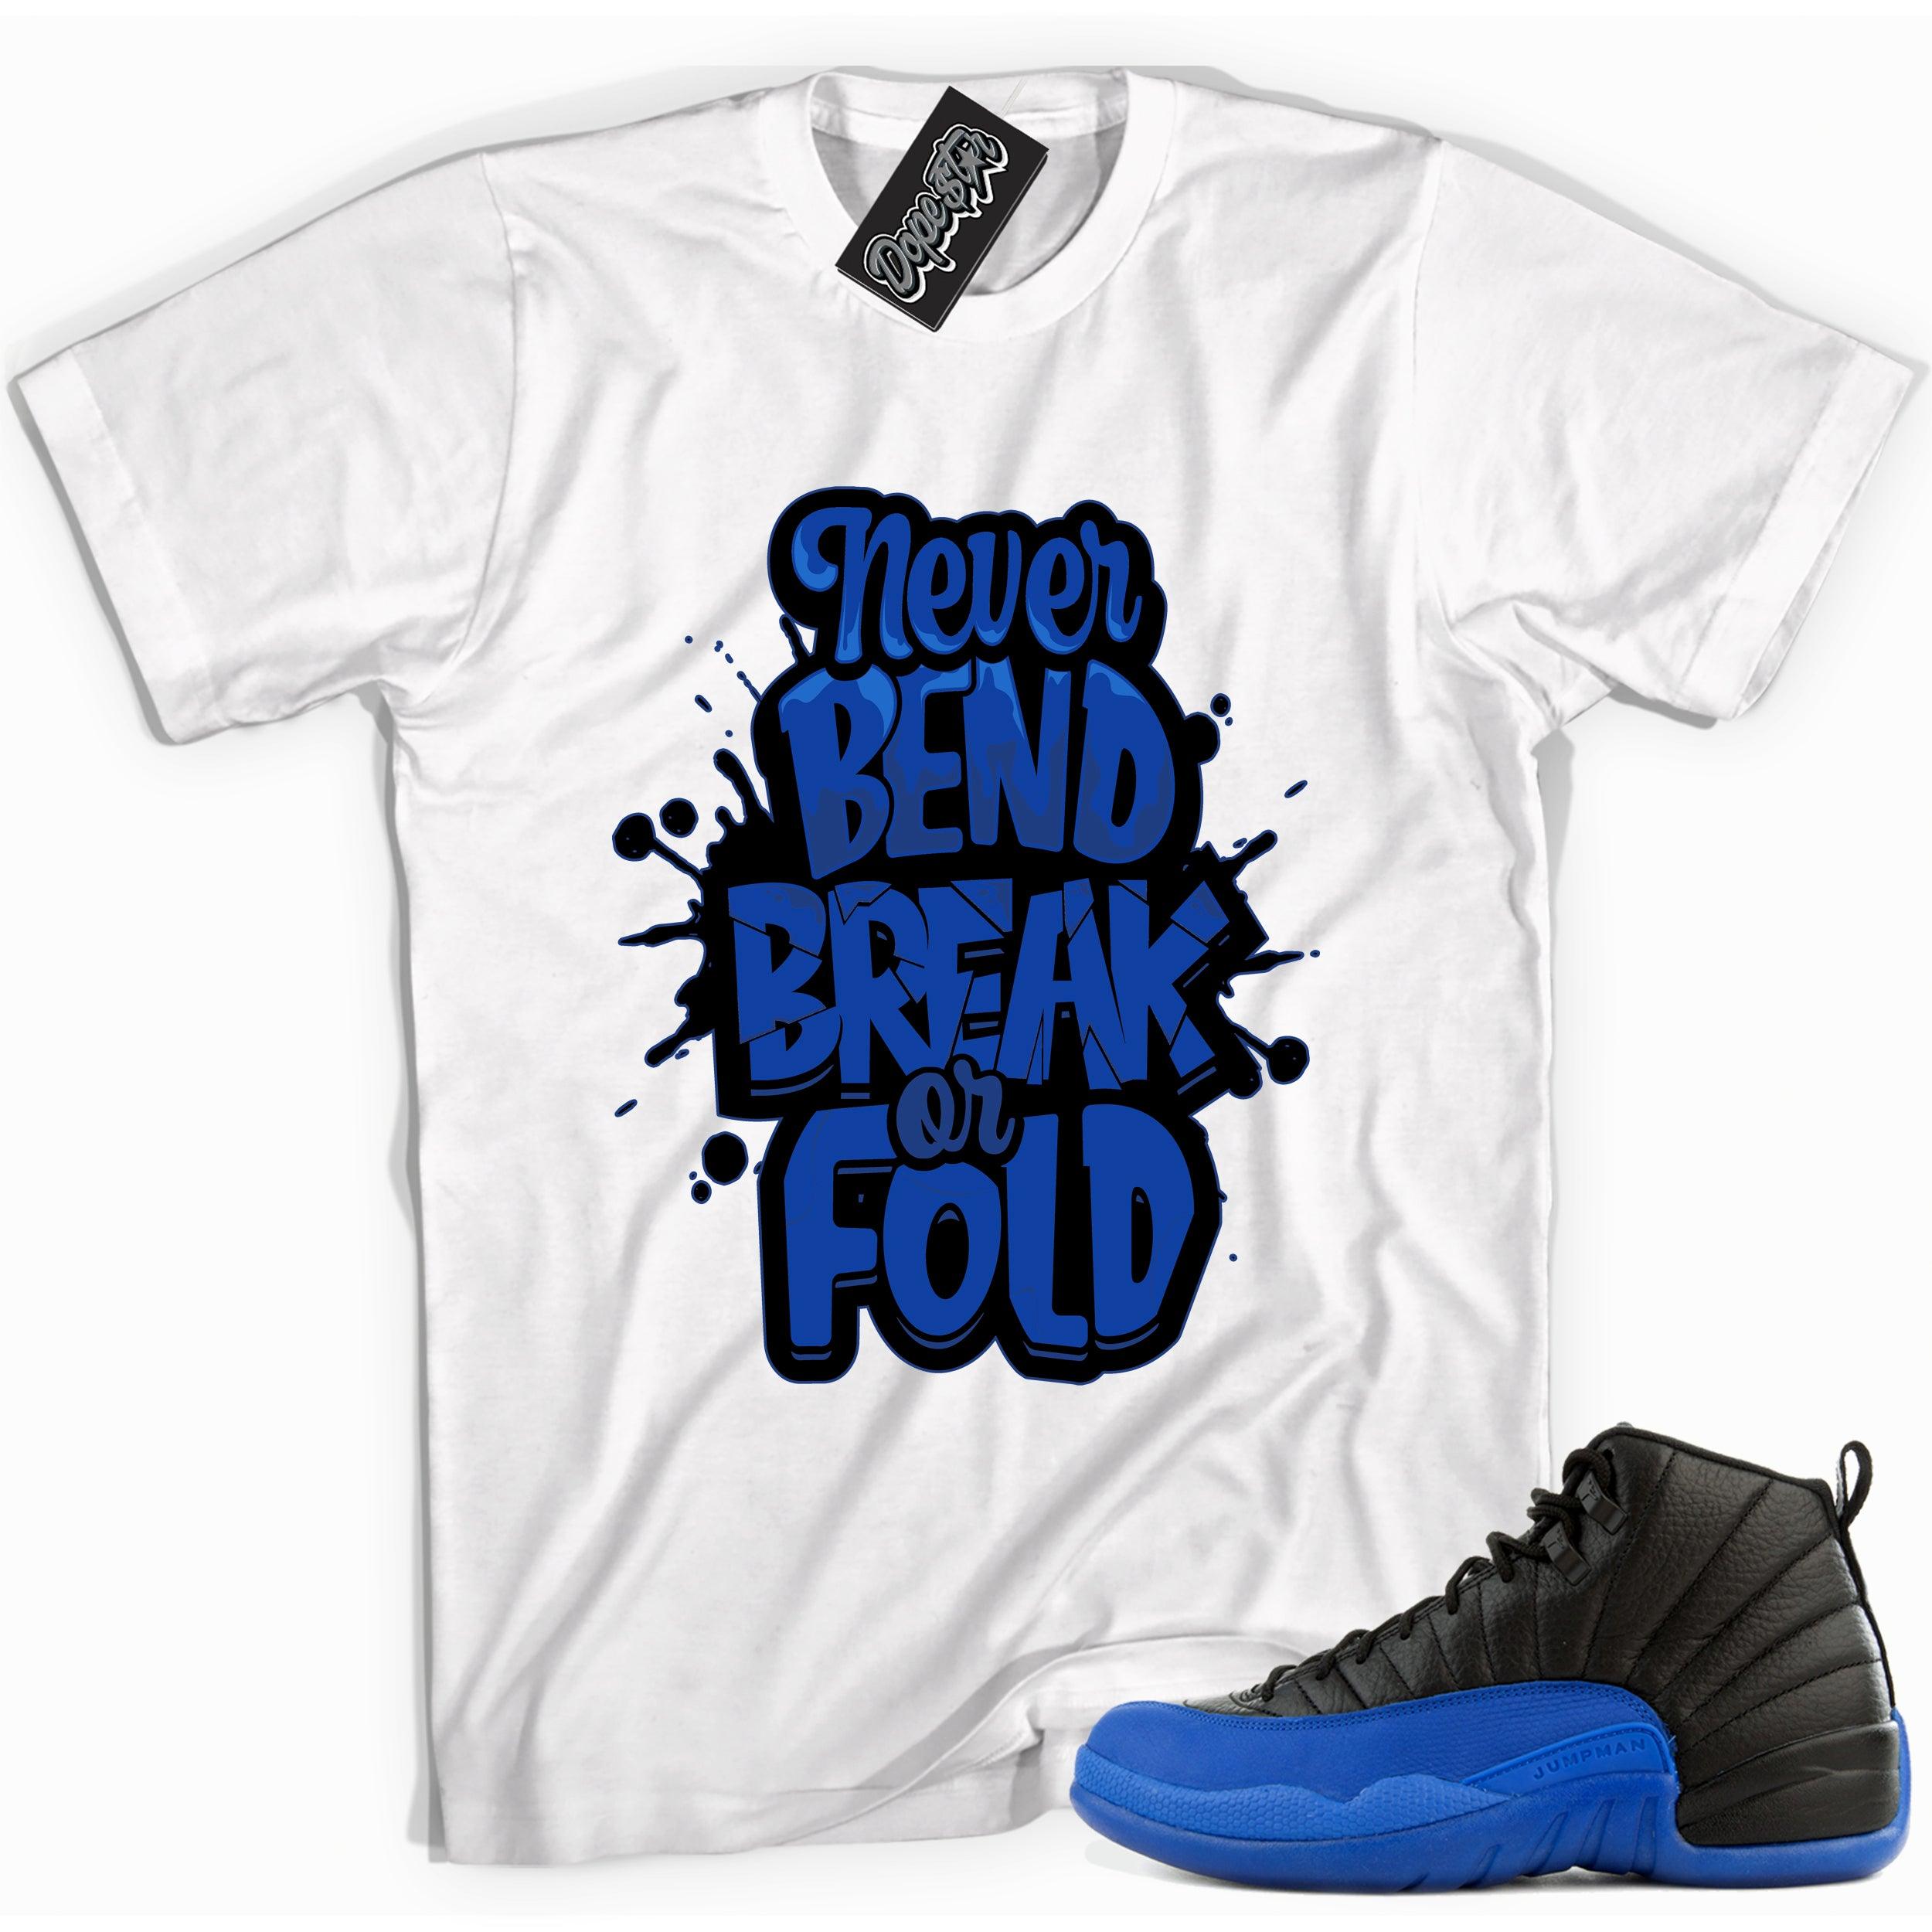 Cool white graphic tee with 'never bend break or fold' print, that perfectly matches Air Jordan 12 Retro Black Game Royal sneakers.